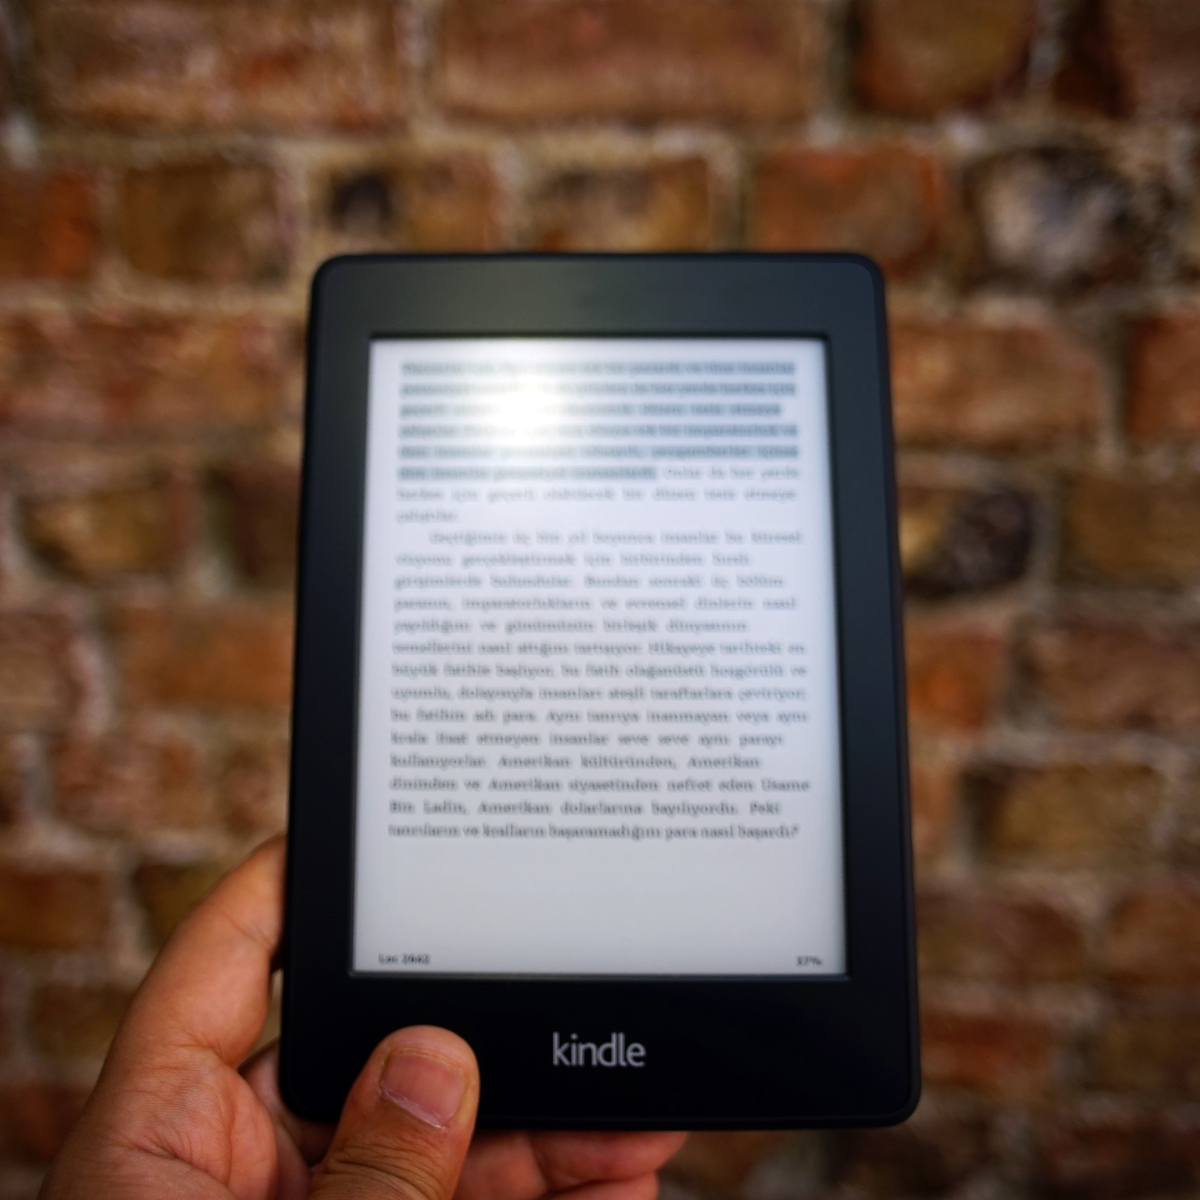 Amazon Prime Day 2022:  Early deals on Kindle devices that can be availed now